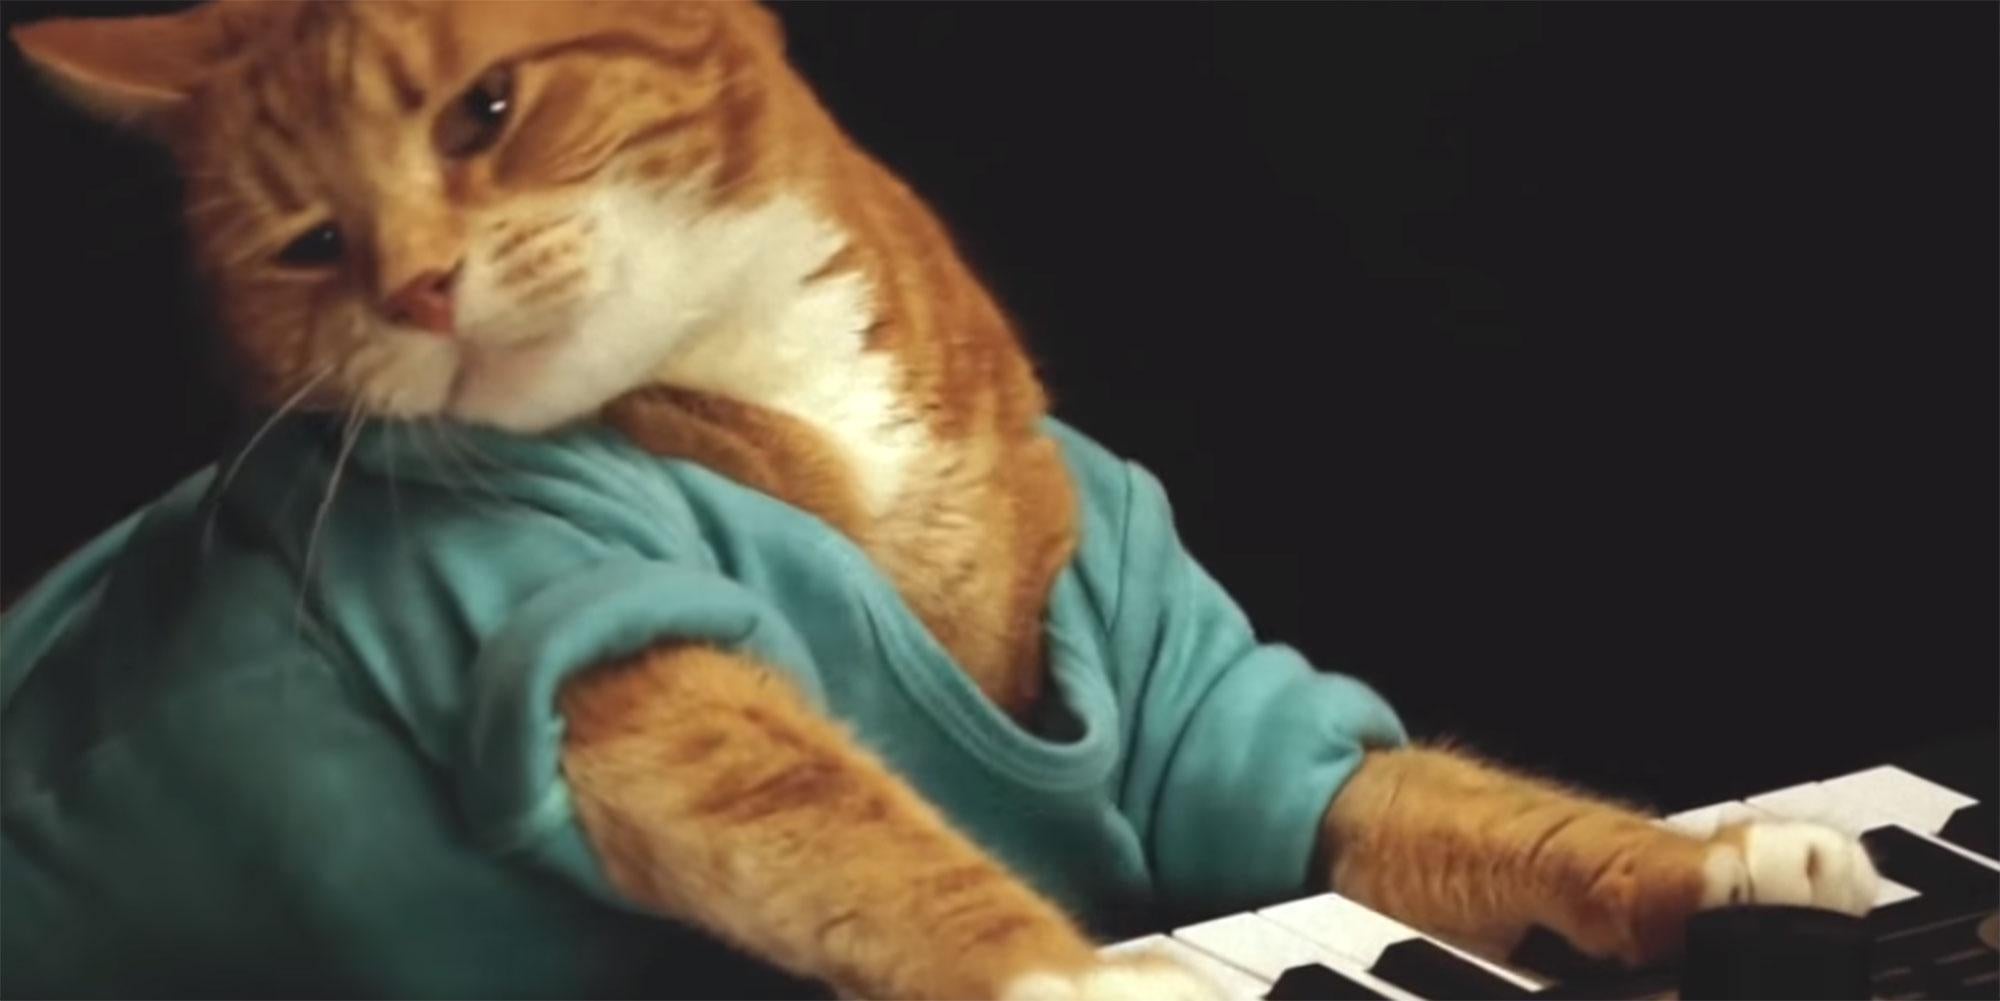 The Keyboard Cat has died and the internet is in mourning 